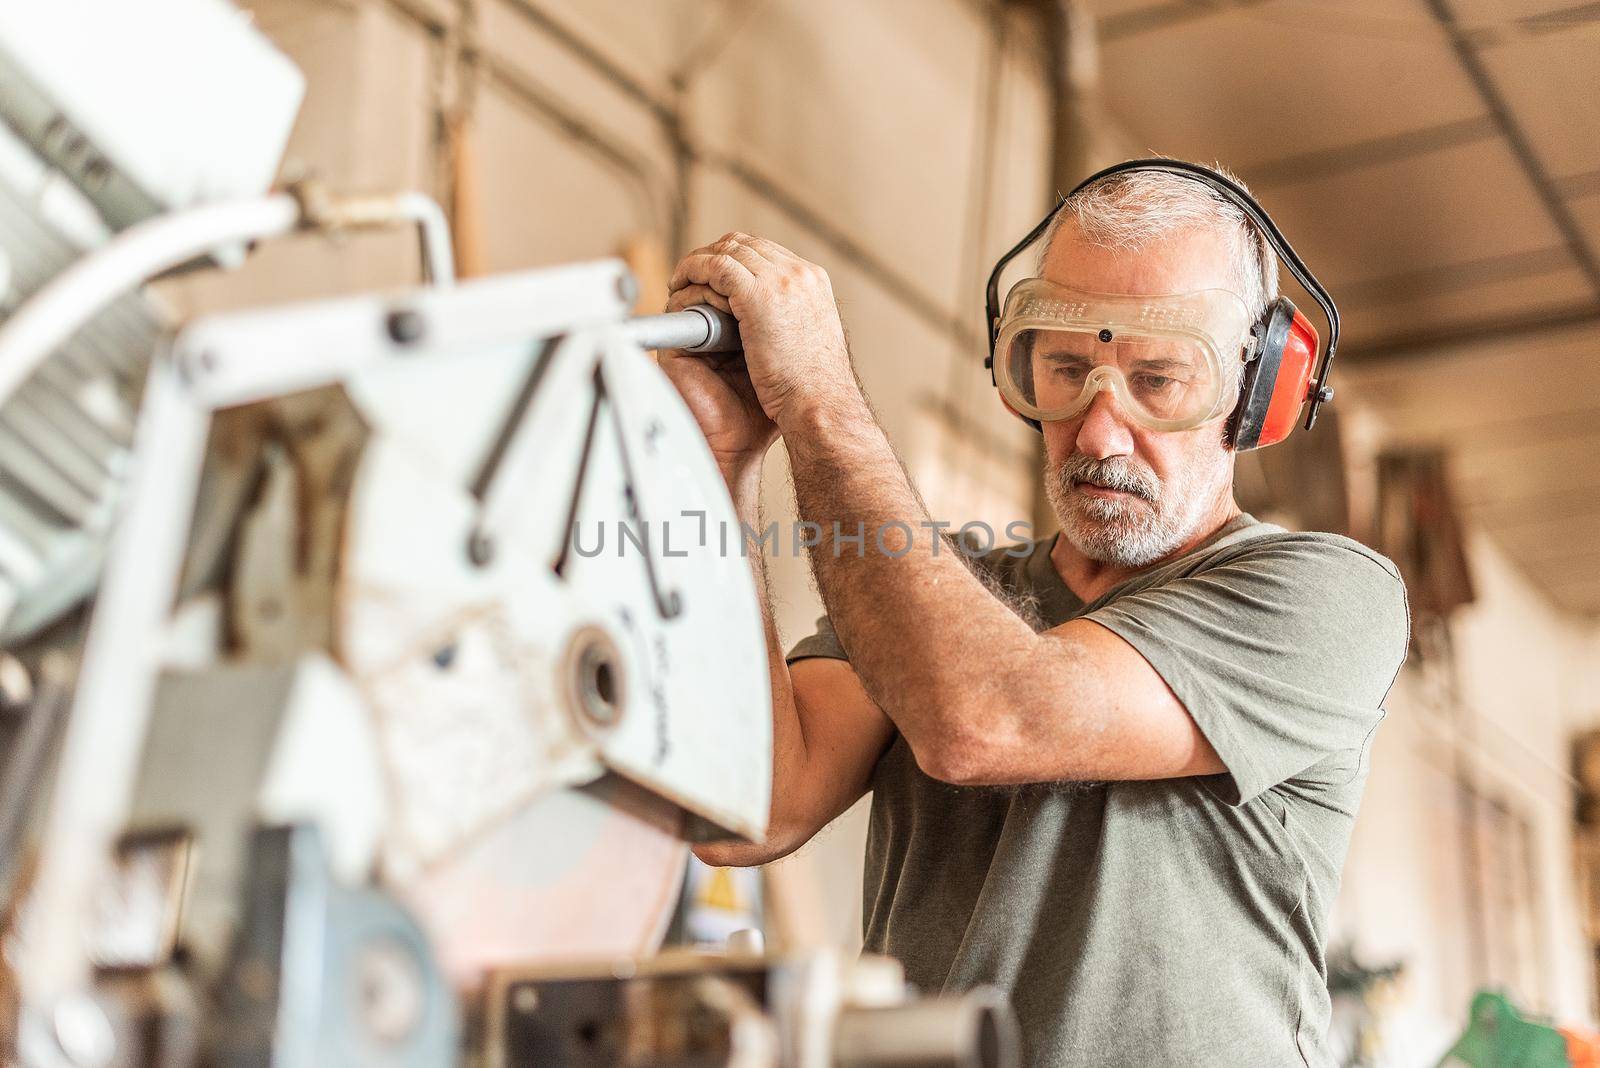 Man cutting a stainless tube using a safety equipment, blurred foreground